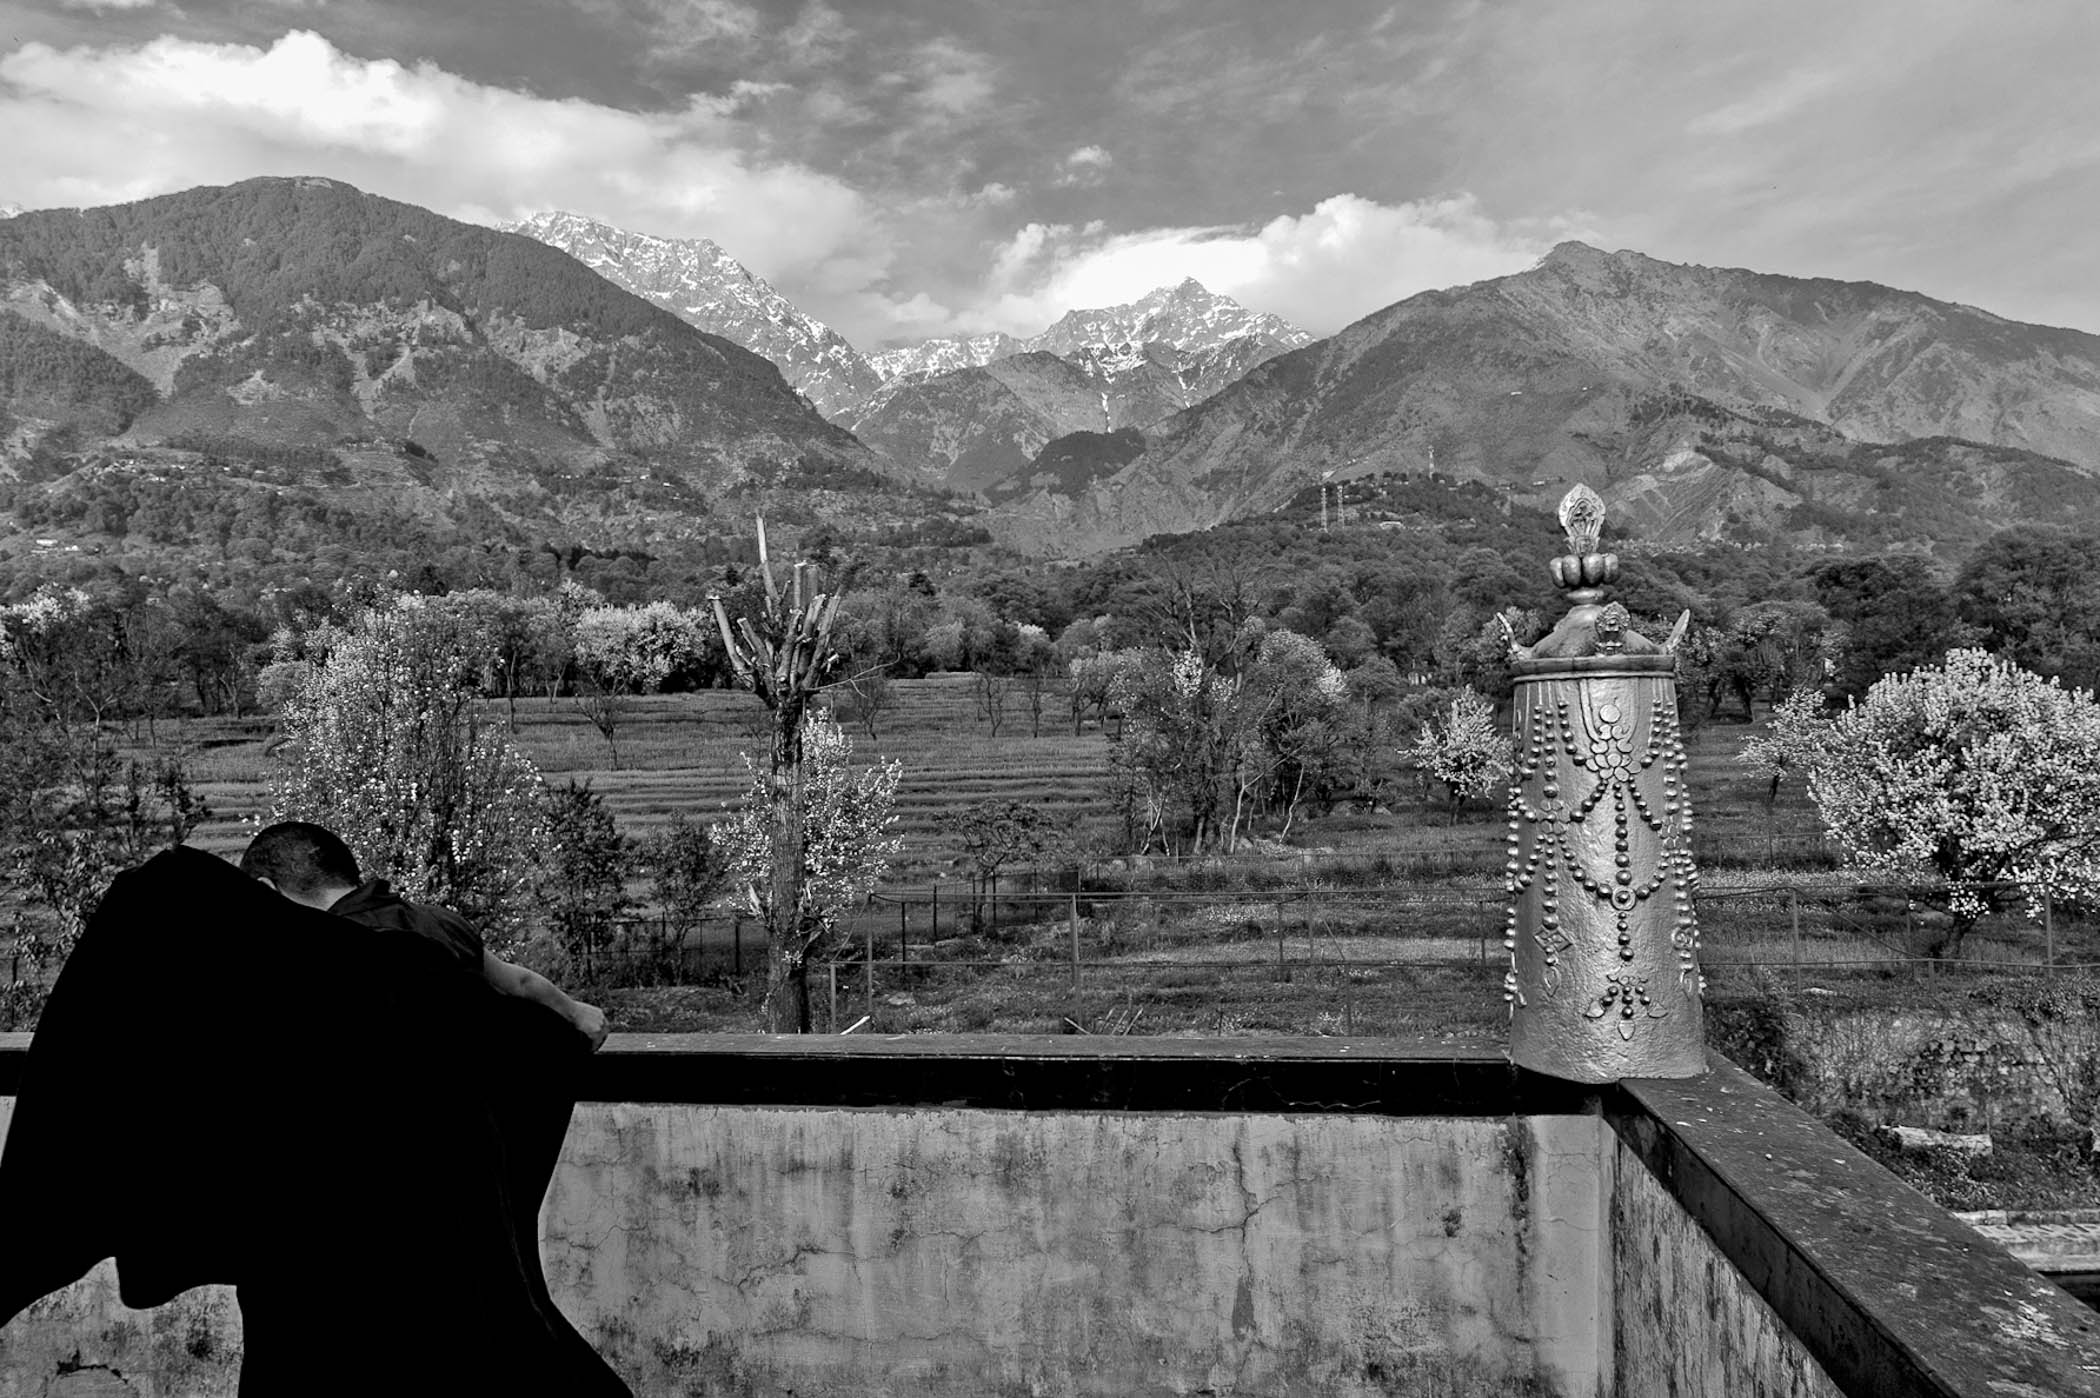 View of the Himalayas from the Dolma Ling convent balcony